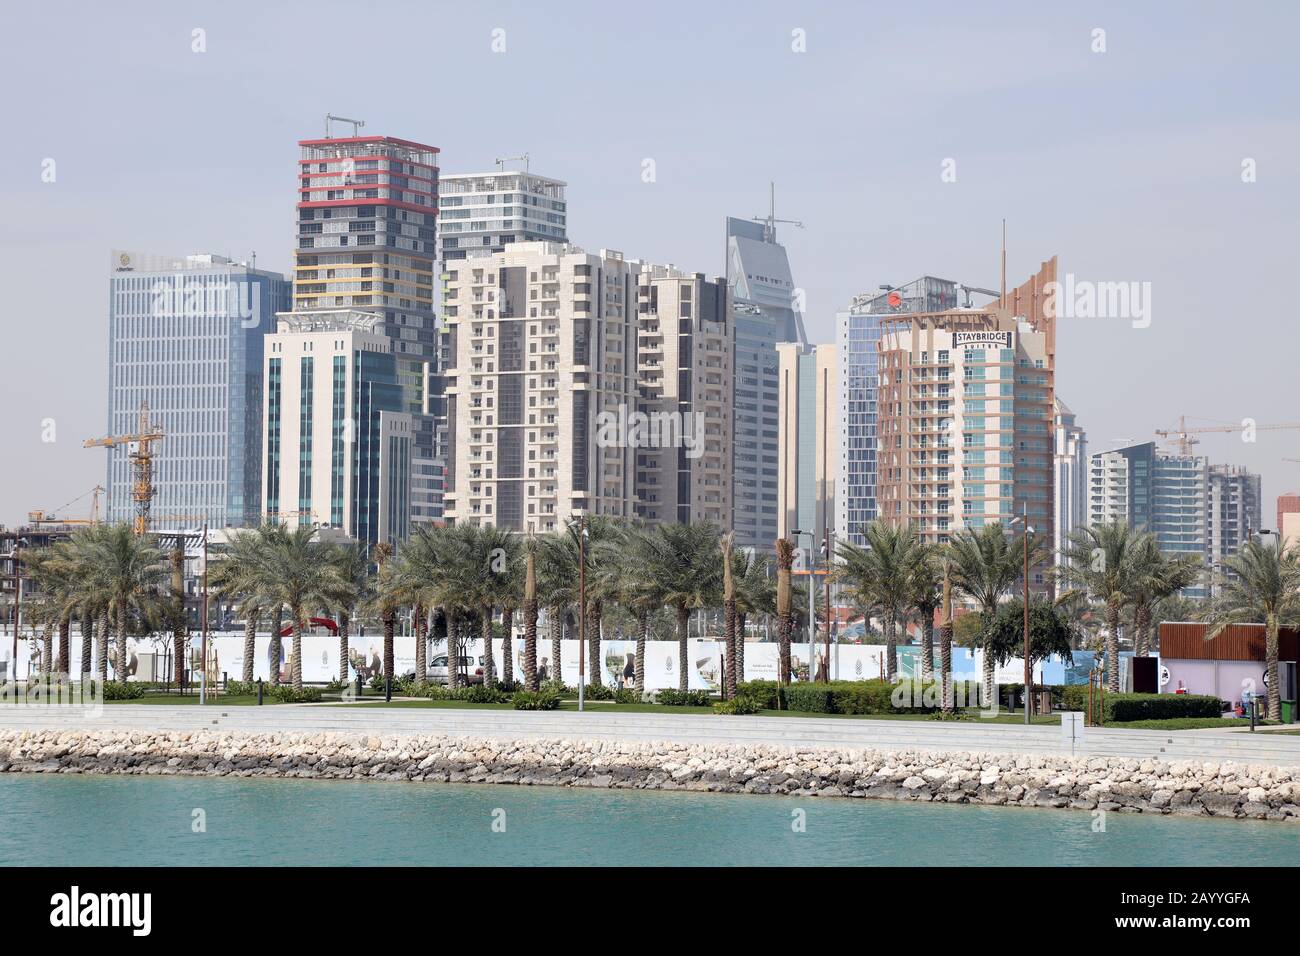 Doha / Qatar – February 17, 2020: Commercial towers in the Lusail area of Doha Stock Photo